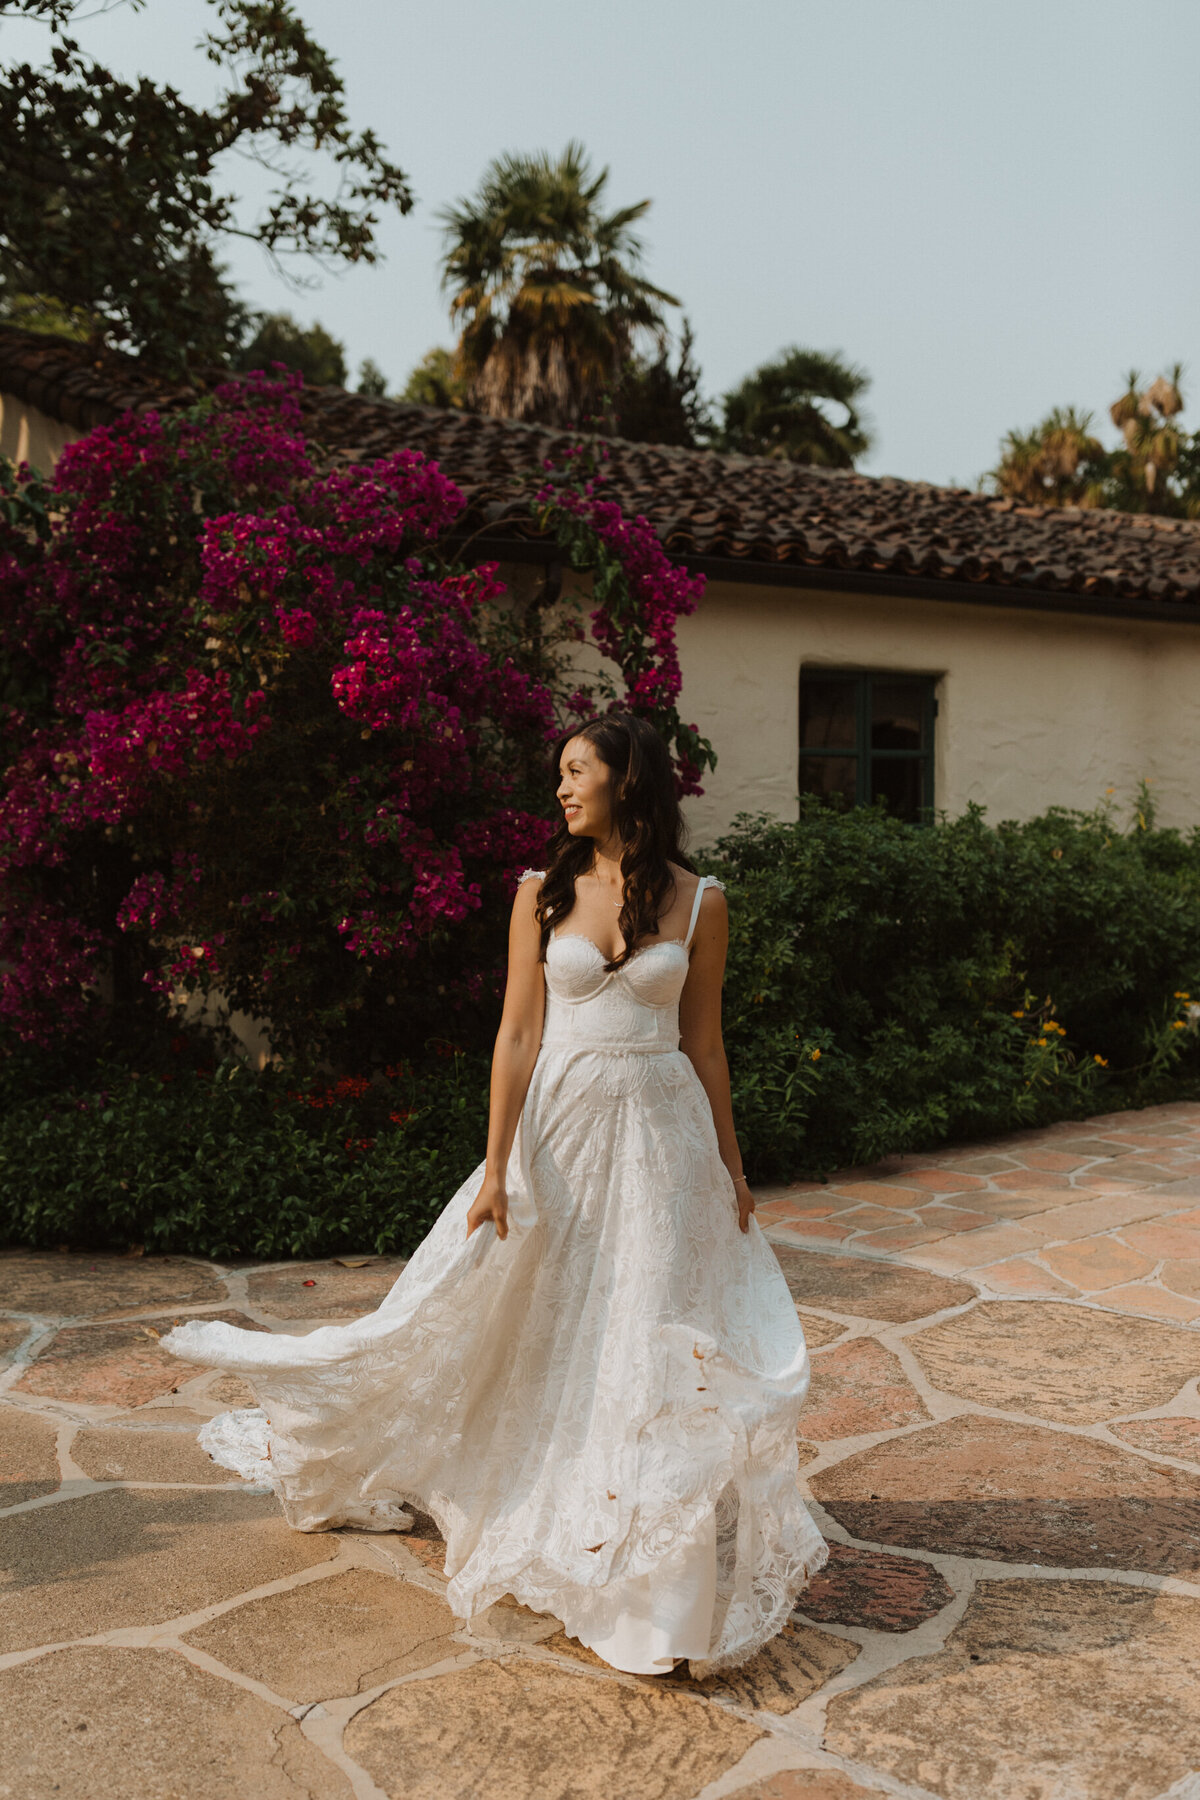 Bride with wedding dress blowing in the wind standing in front of Pueblo style building and pink bushes